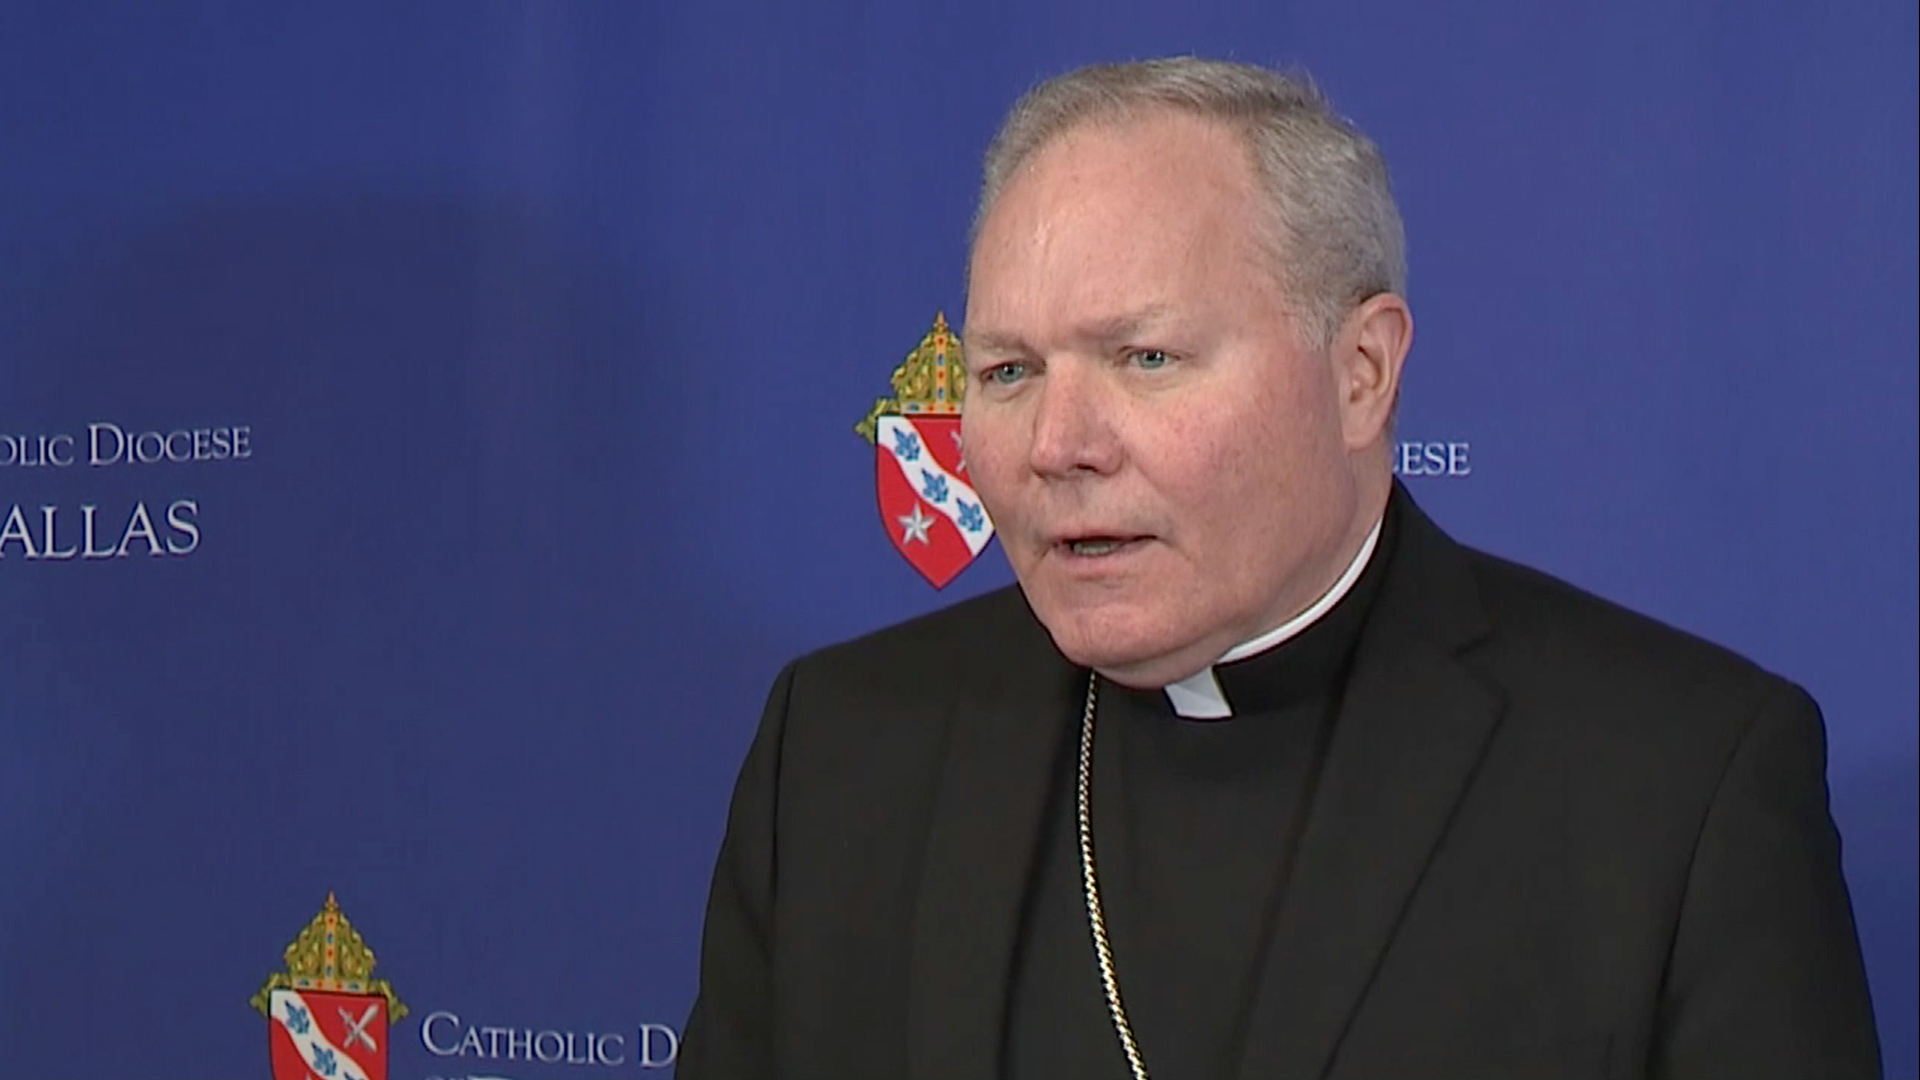 Dallas Bishop Edward Burns addressed the media after the diocese released 31 names of priests credibly accused of sexual abuse.